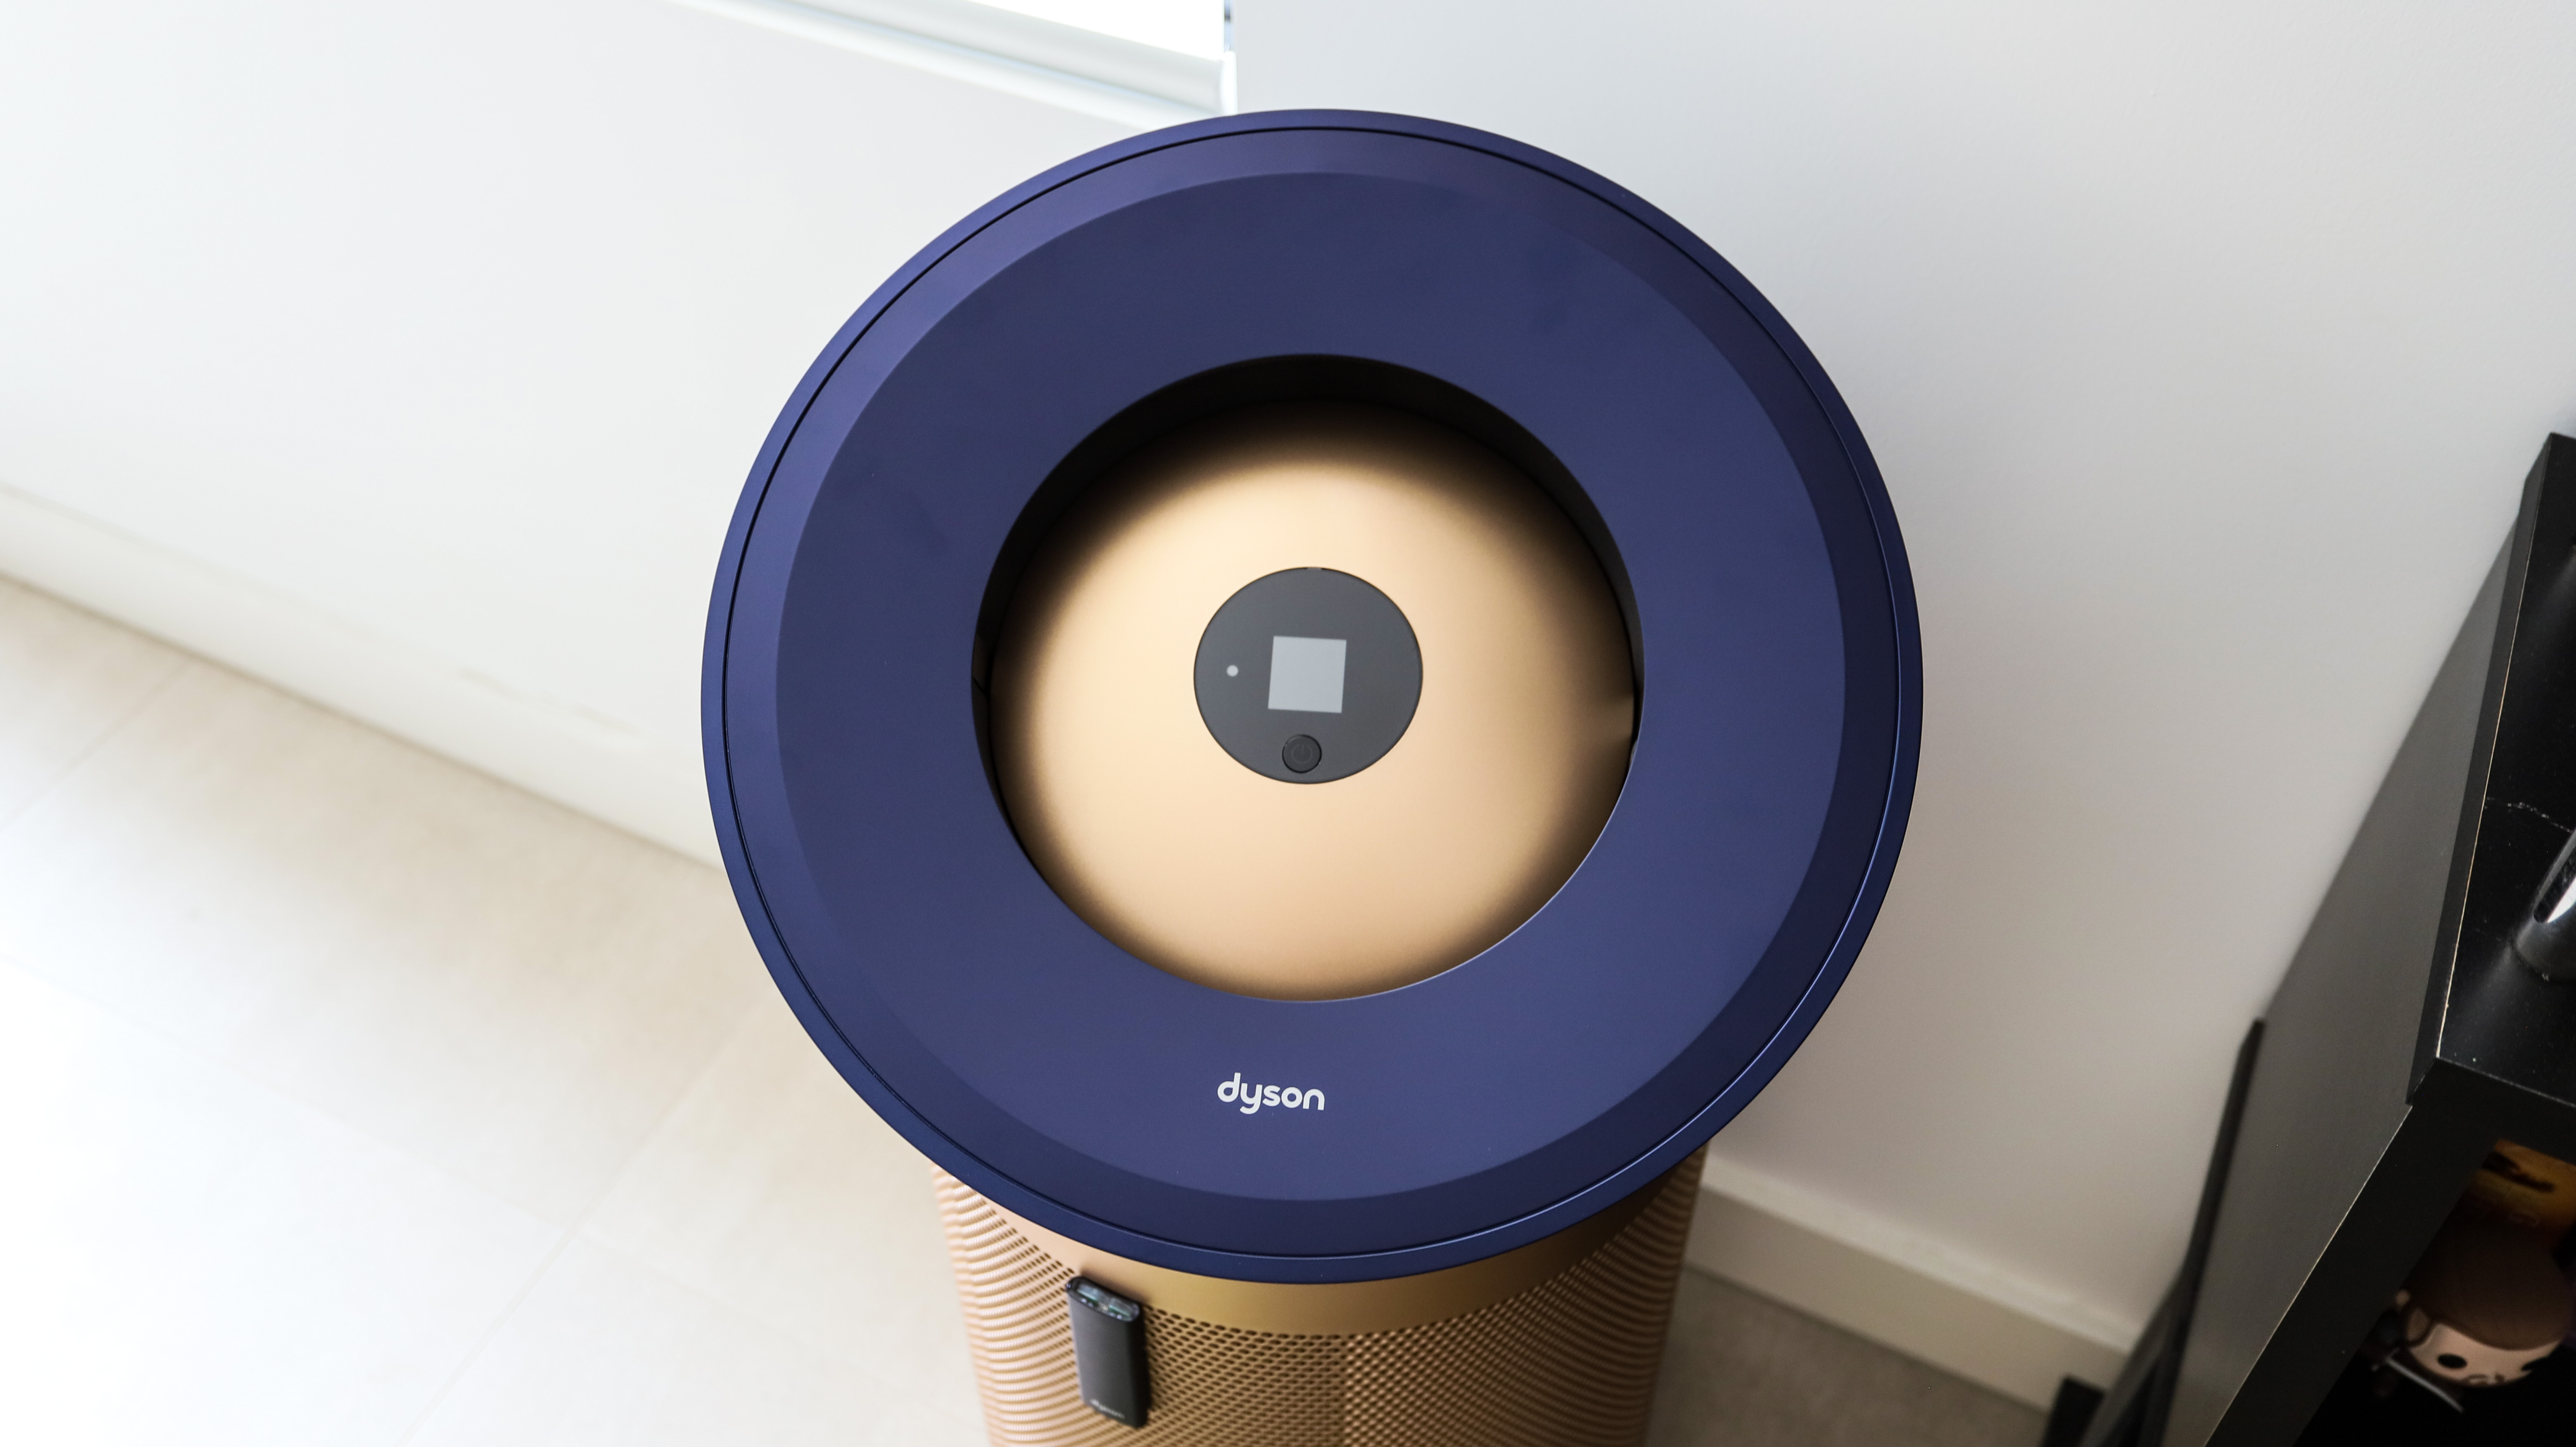 The bowl or cone of the Dyson Purifier Big+Quiet Formaldehyde